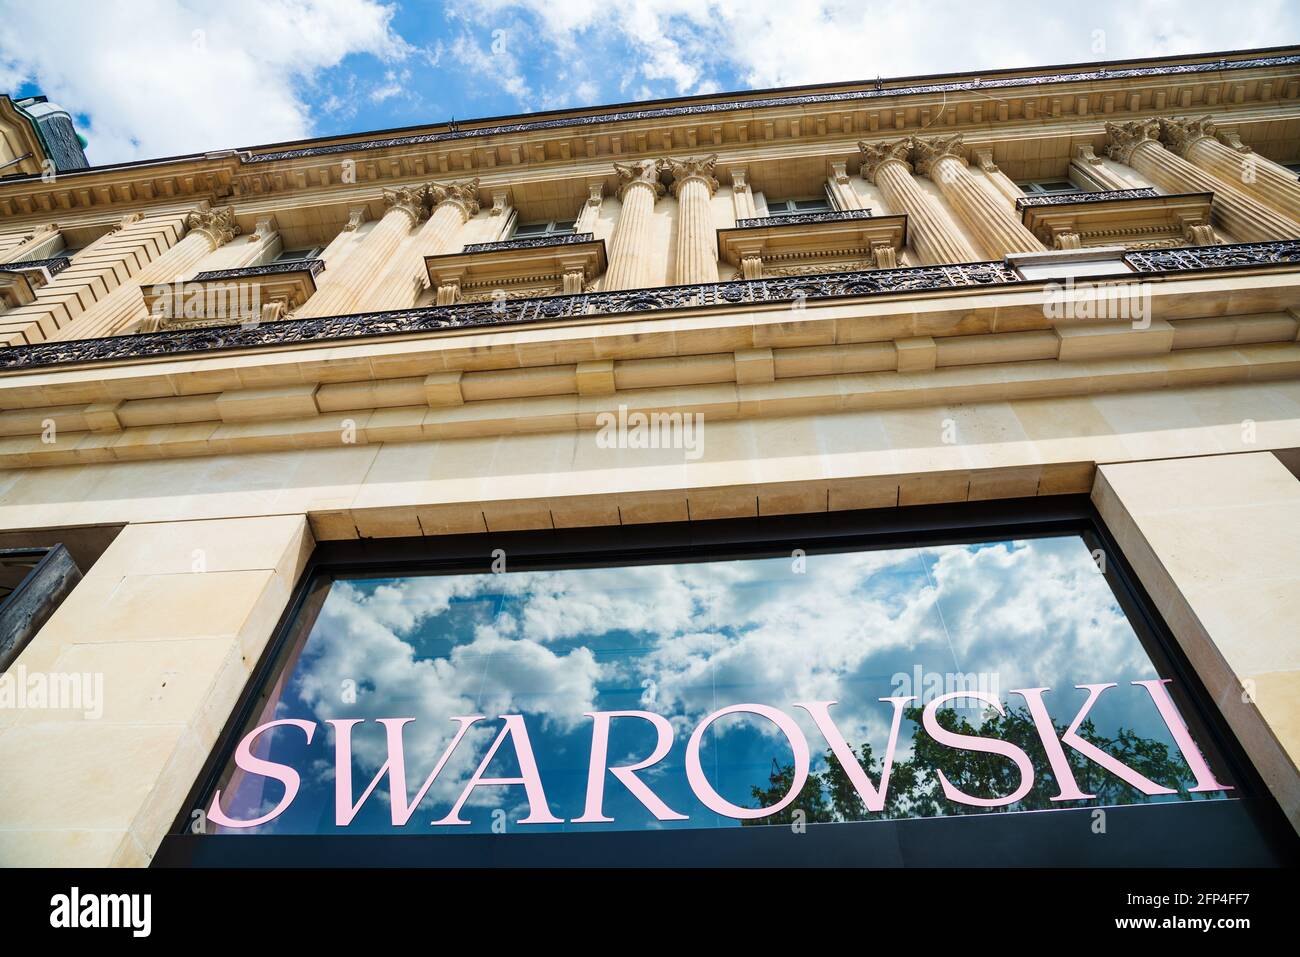 Swarovski store entrance at Avenue des Champs-Elysees, Paris, France.  Famous Austrian luxury brand known for its crystal jewelry and watches  Stock Photo - Alamy